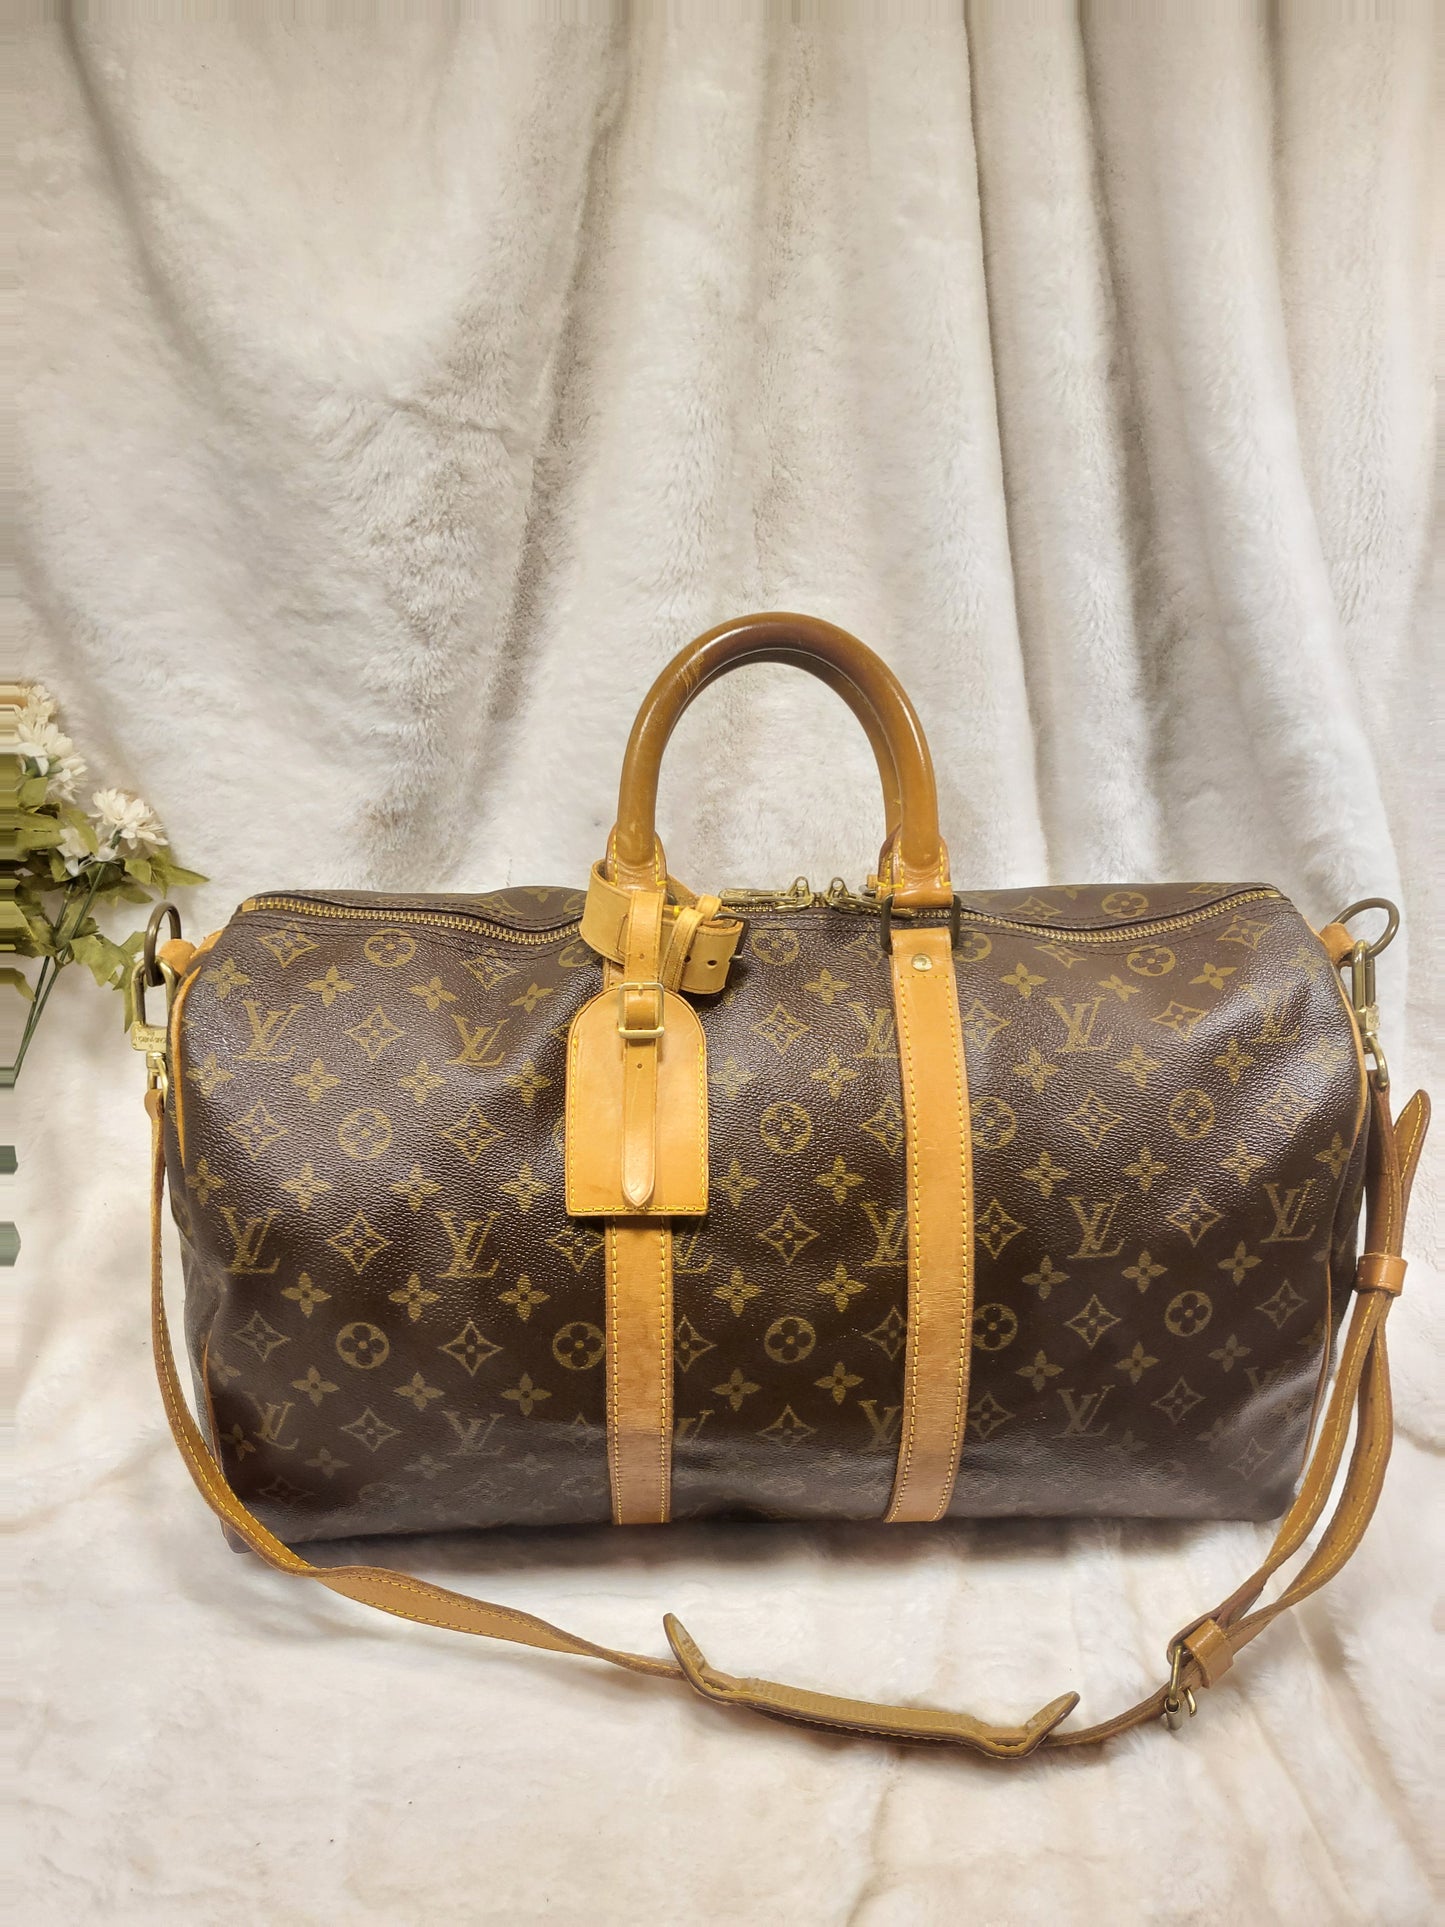 Authentic pre-owned Louis Vuitton Keepall 45 bandoliere travel luggage bag